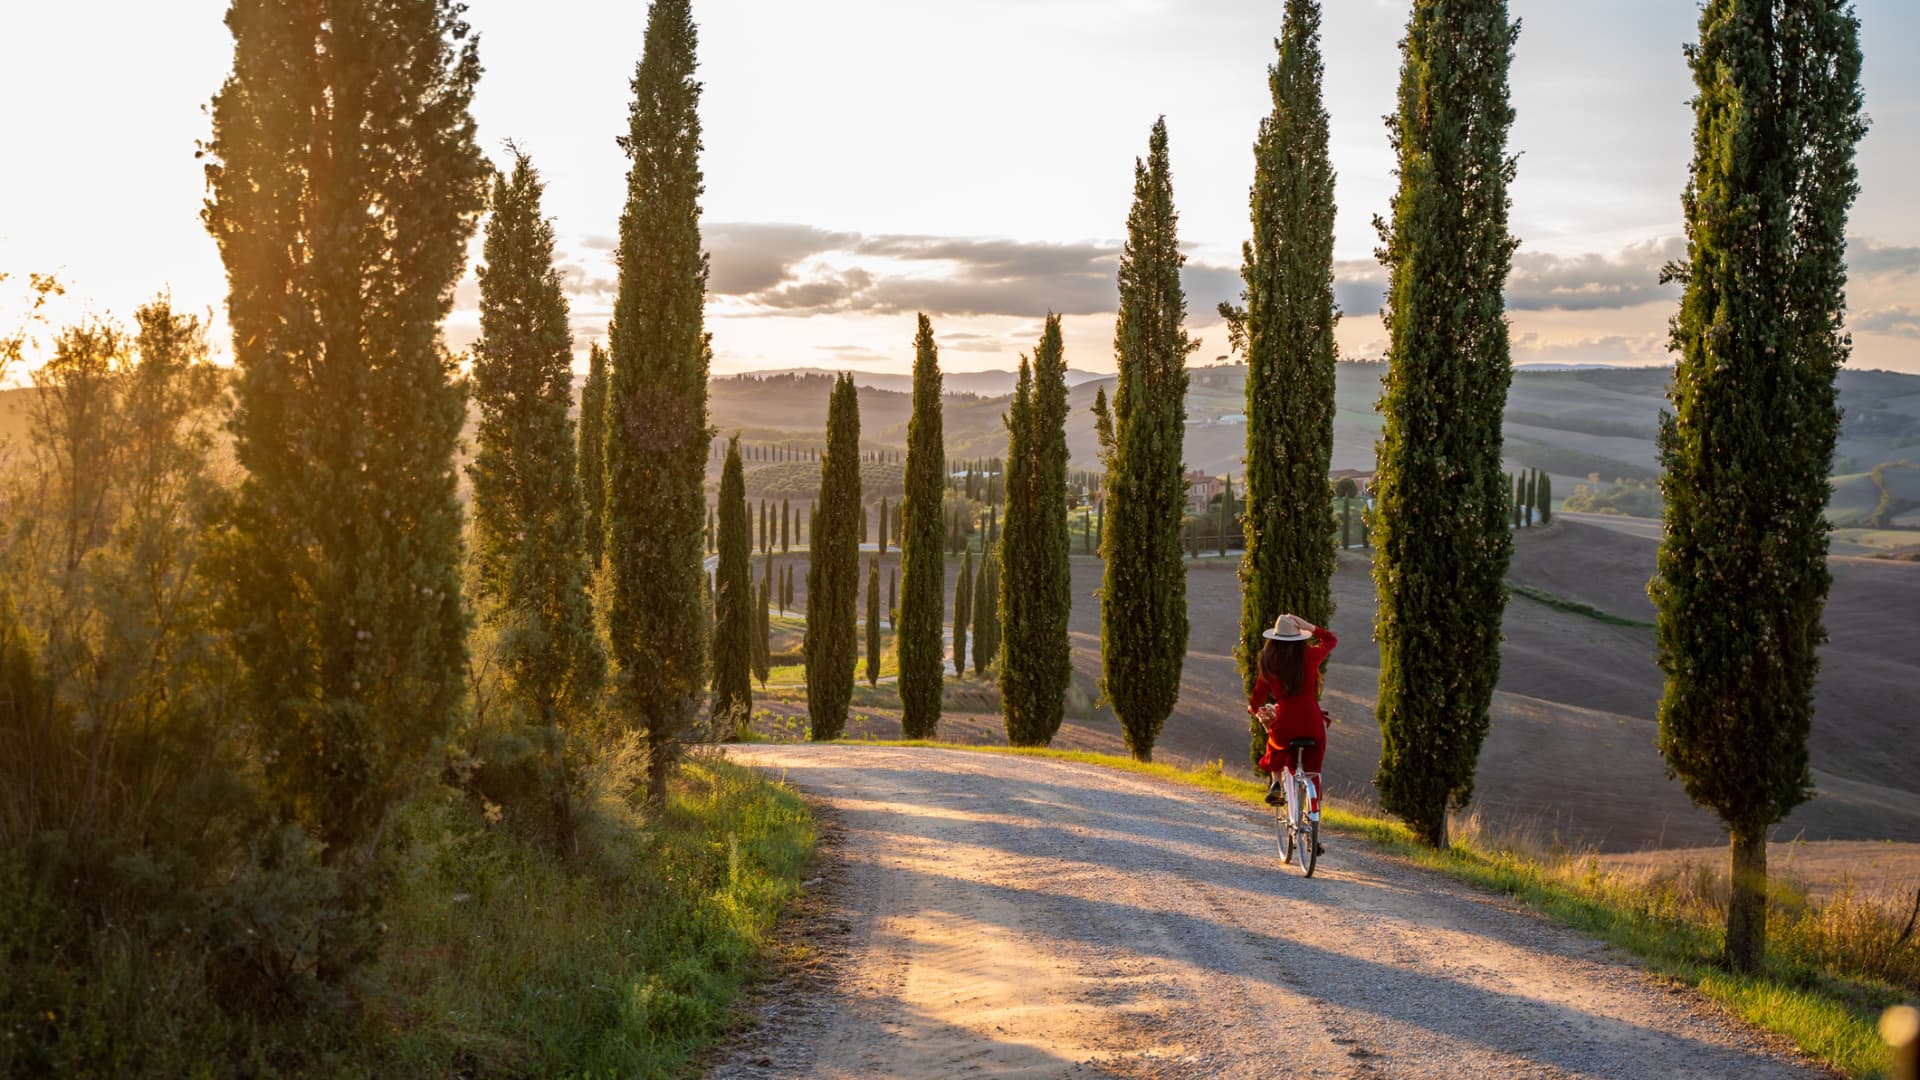 Italy has a new program to pay people $32,000 to move to Tuscany